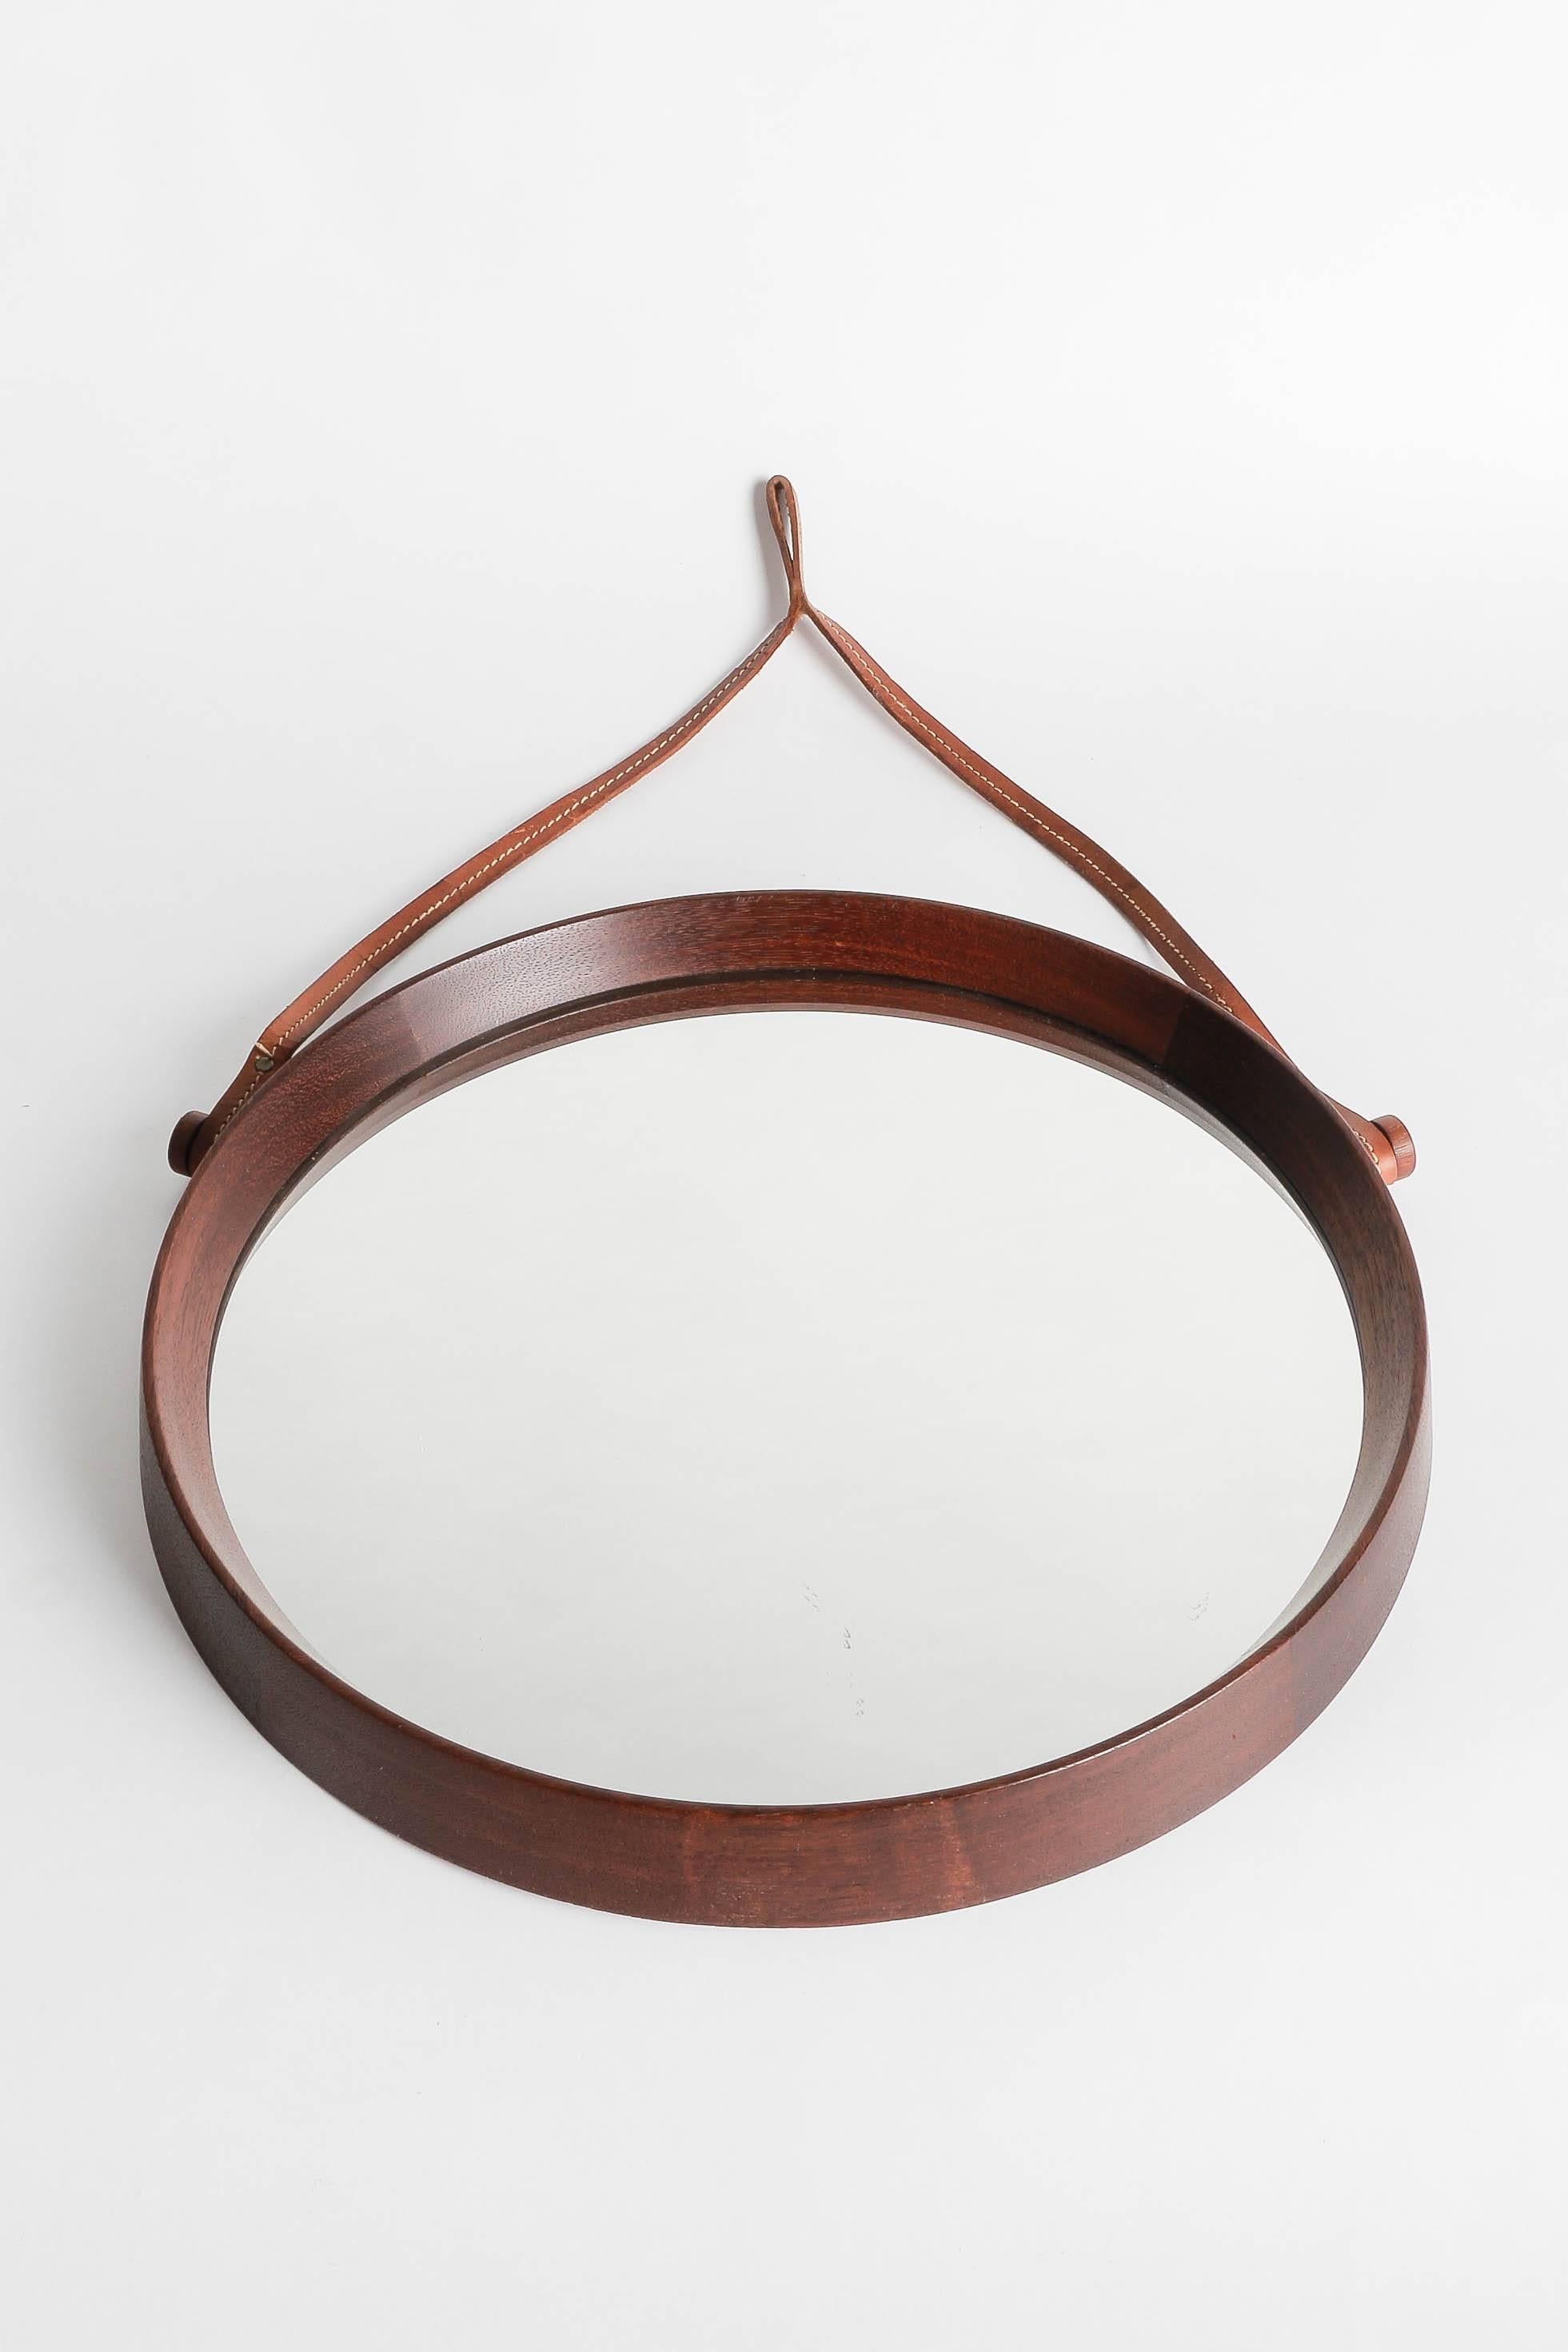 Beautiful Swedish mirror by Uno & Östen Kristiansson in solid teak with a leather strap to hang it on the wall.